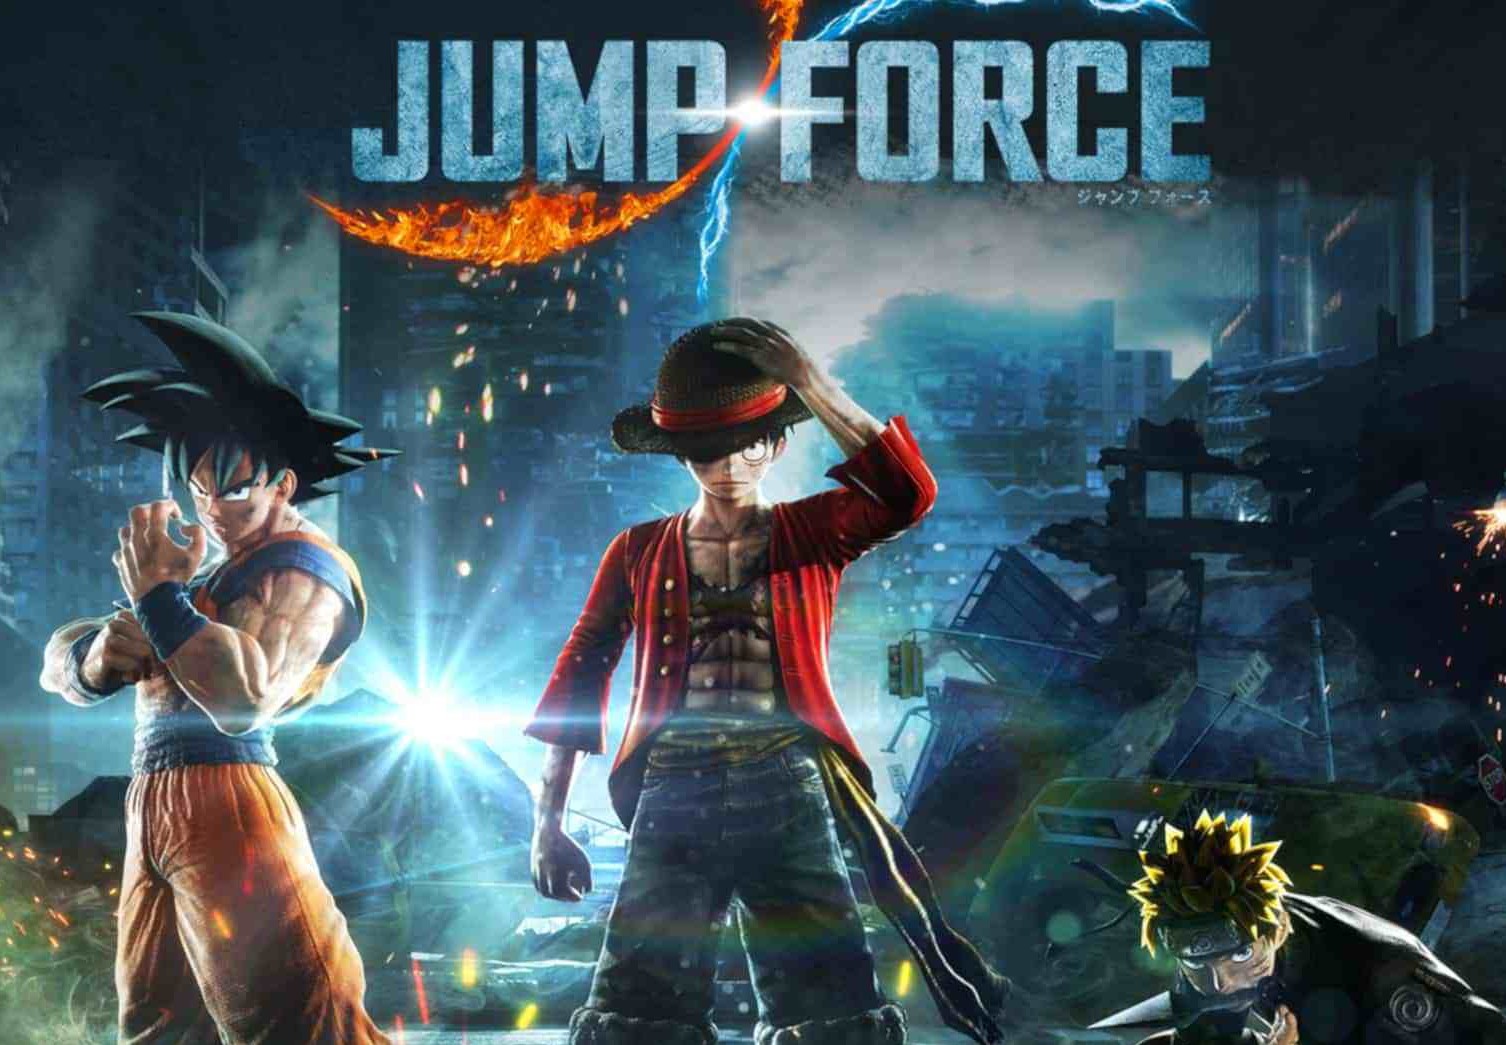 JUMP FORCE PlayStation 4 Account Pixelpuffin.net Activation Link